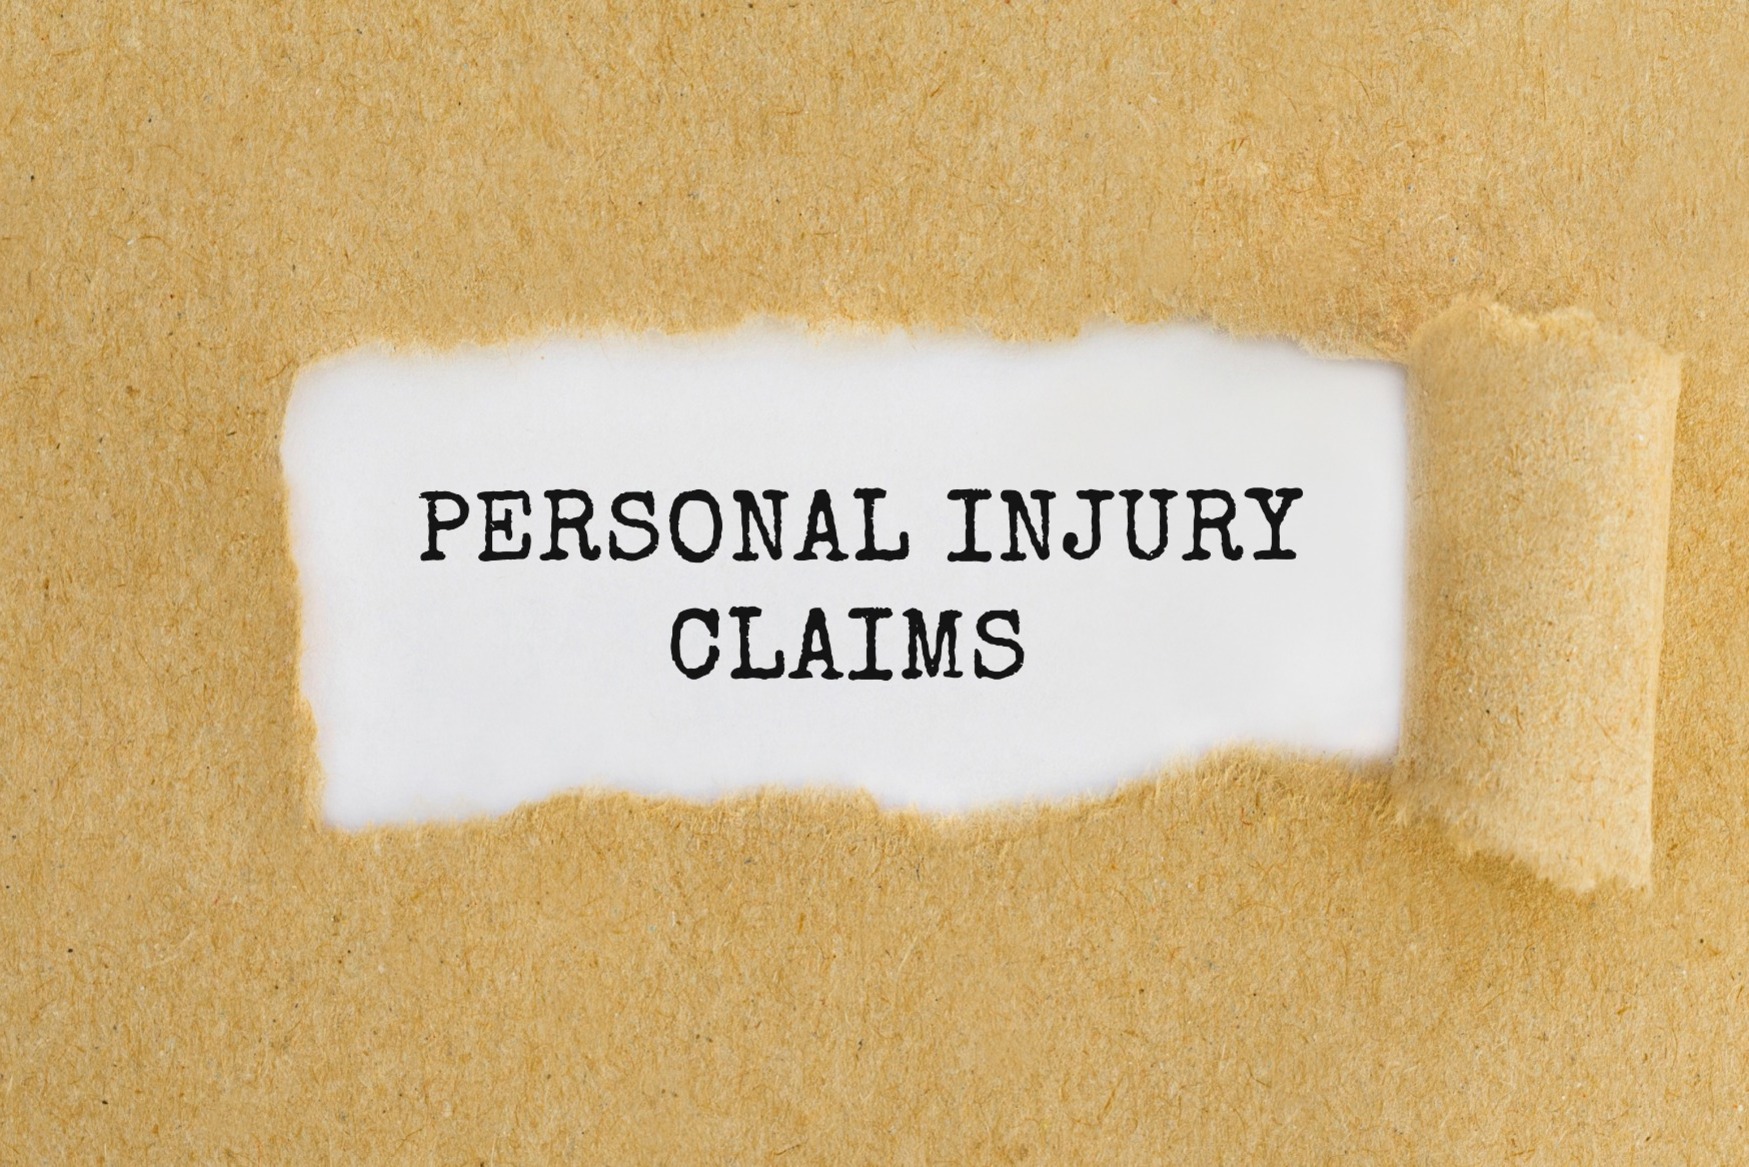 Personal Injury Claims.